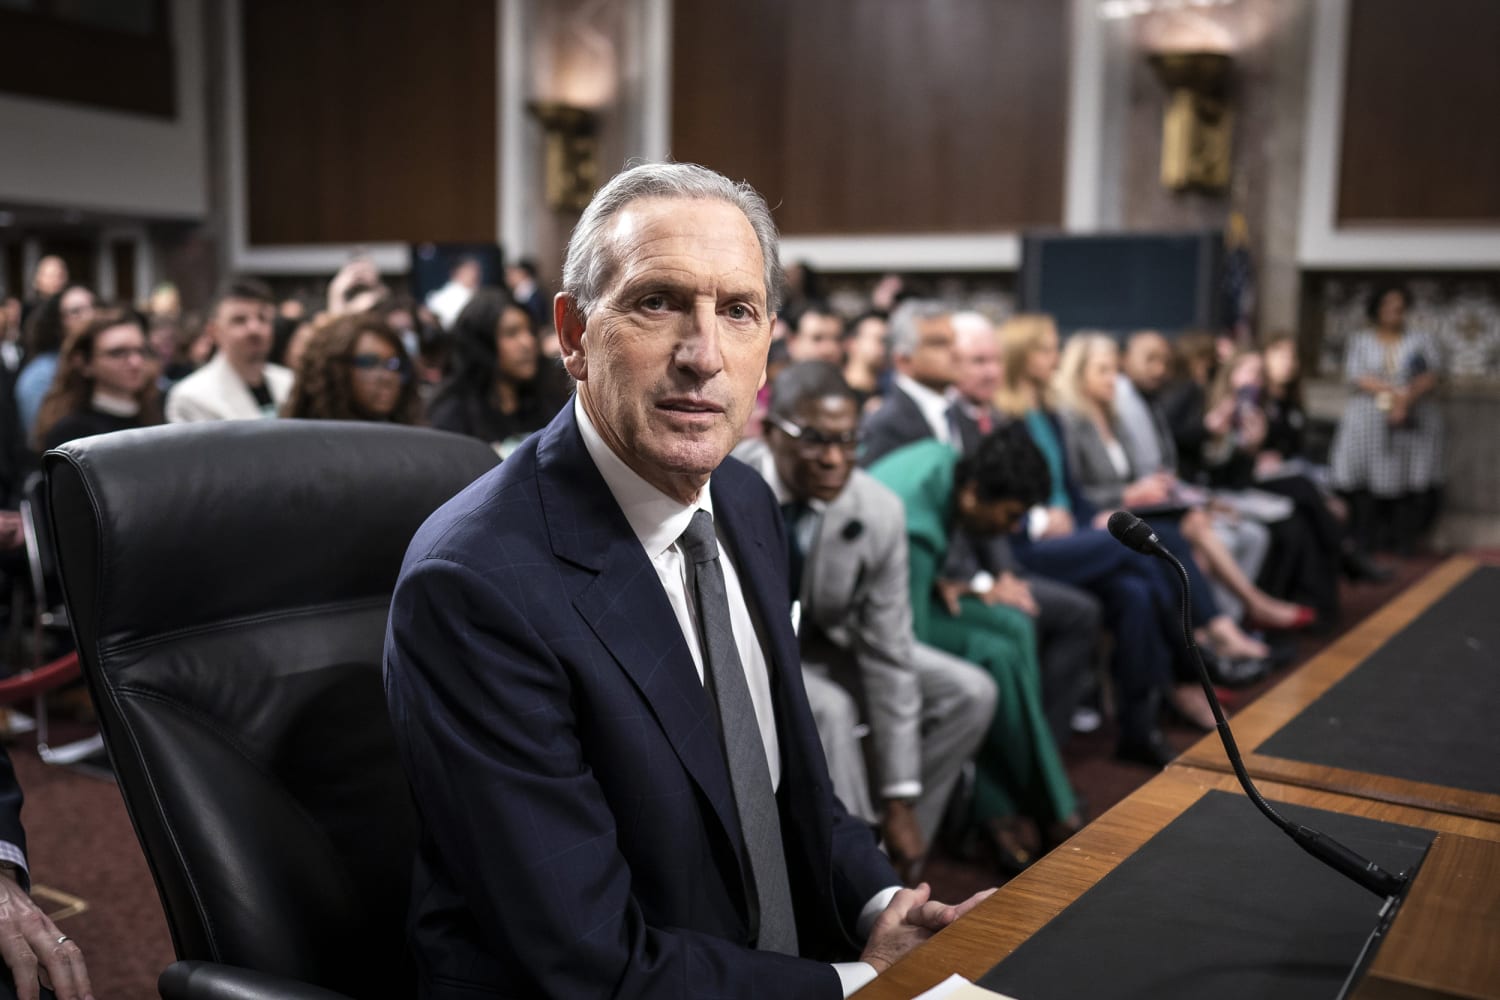 Howard Schultz defends Starbucks' labor practices, bristles at being labeled a billionaire in Sanders-led hearing